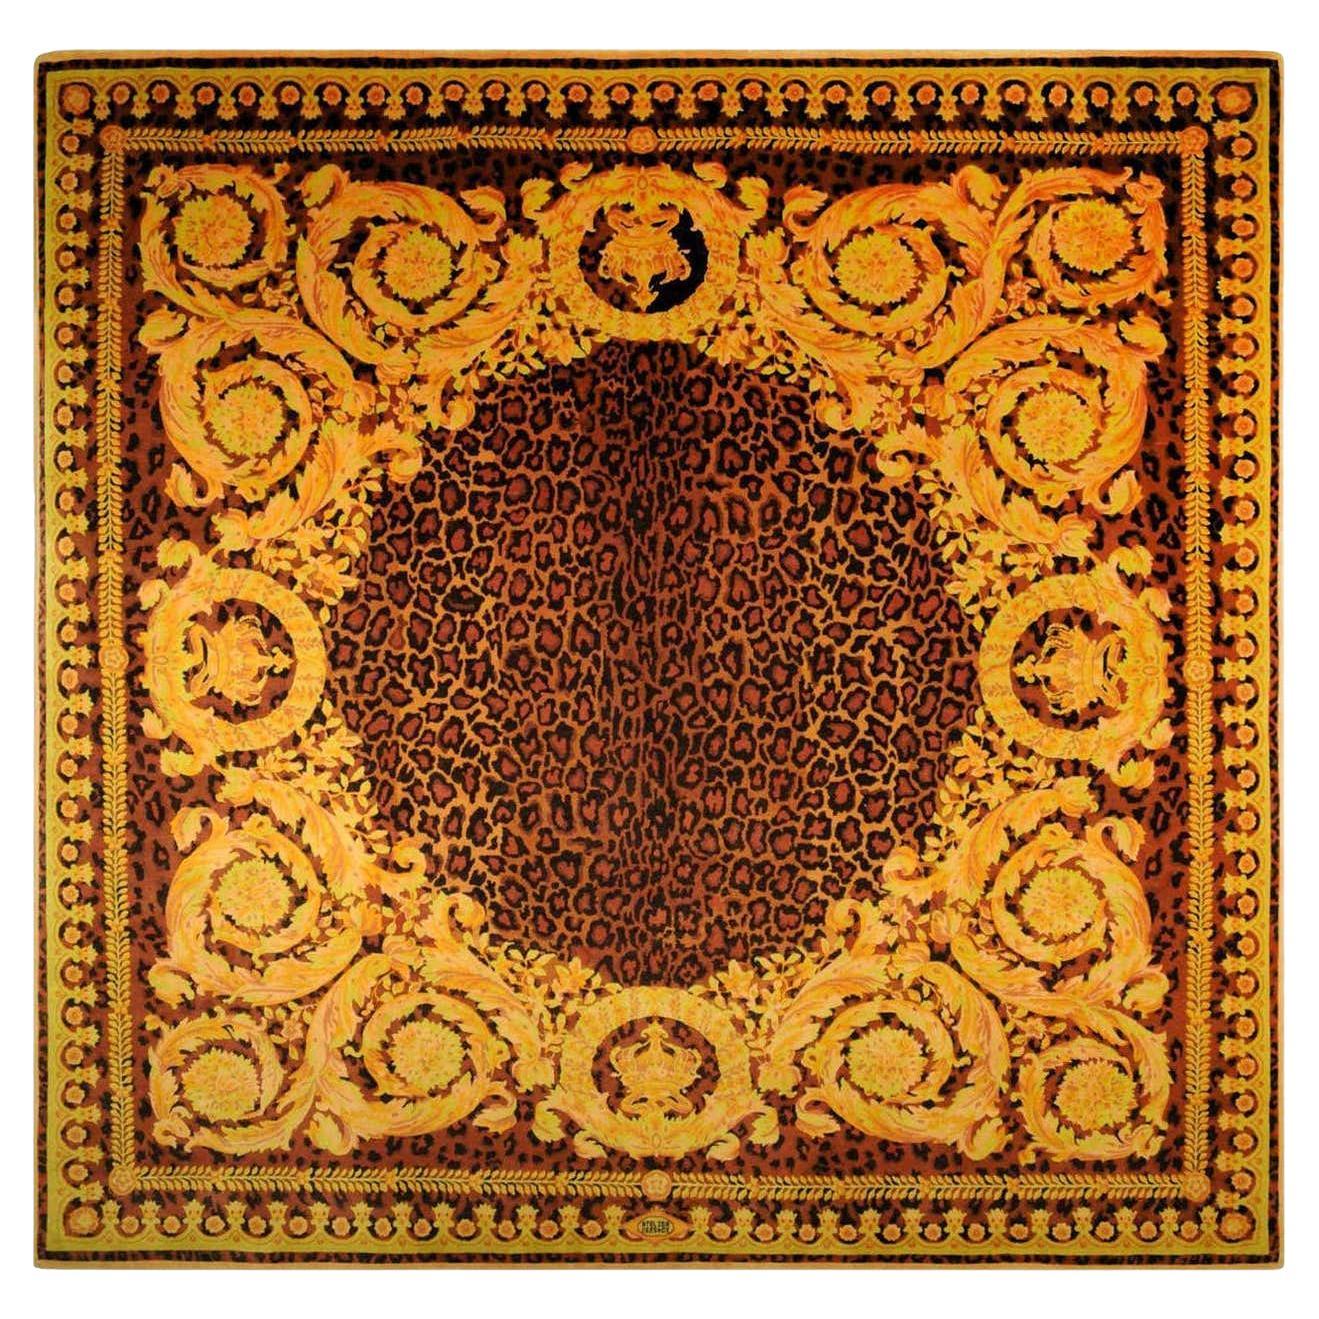 Gianni Versace Collection Rug Wild Barocco, Gold Leopard Animal Print, 1980 For Sale